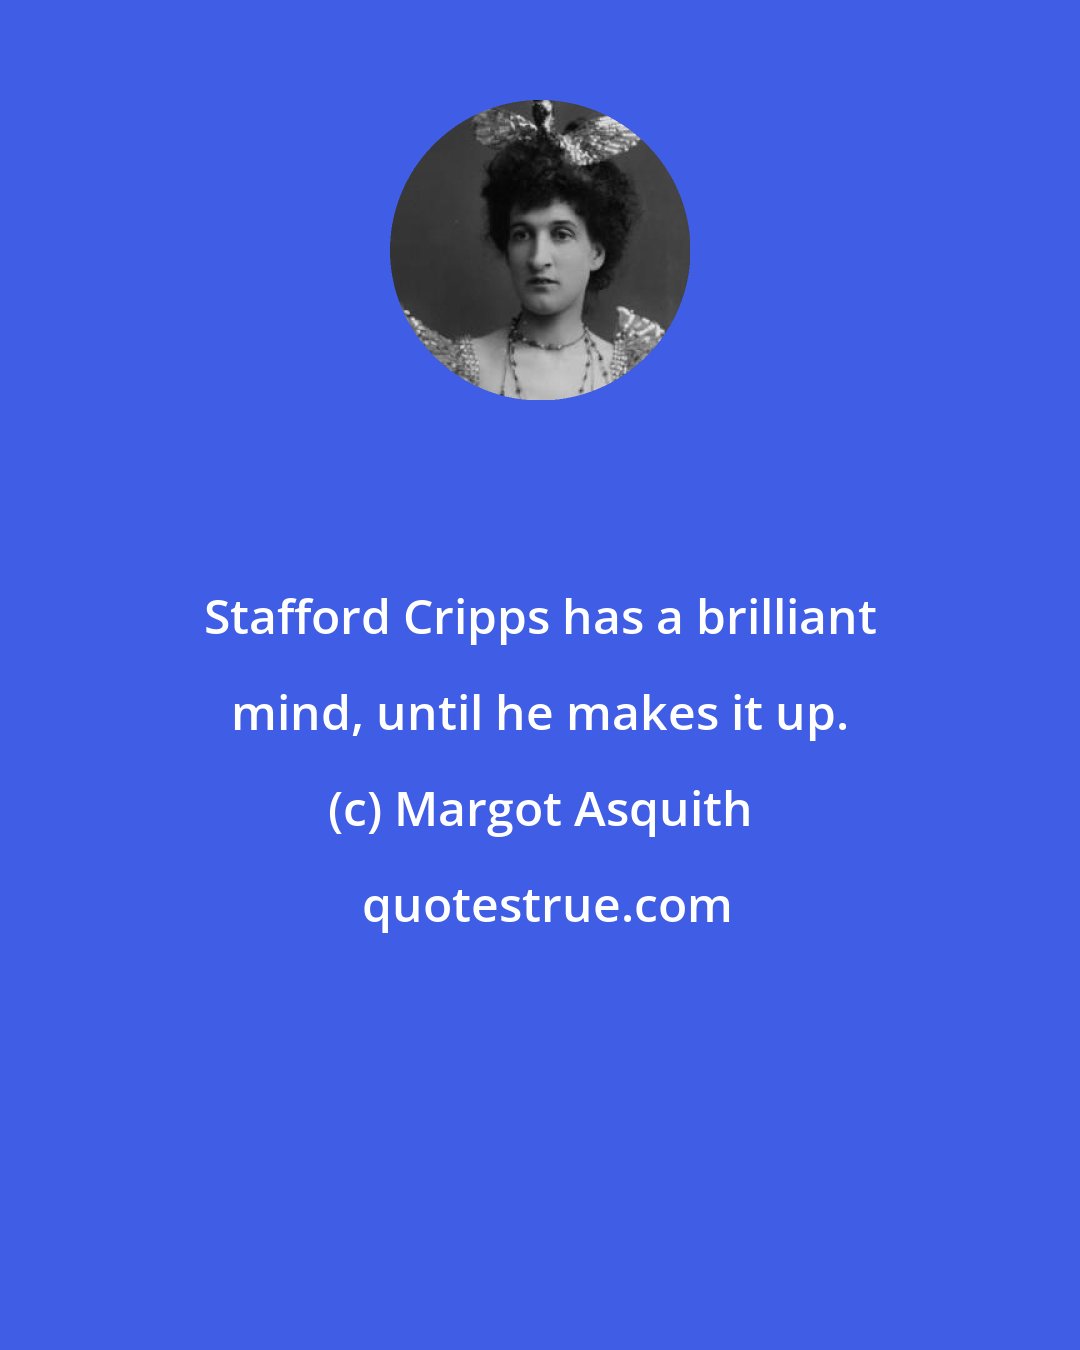 Margot Asquith: Stafford Cripps has a brilliant mind, until he makes it up.